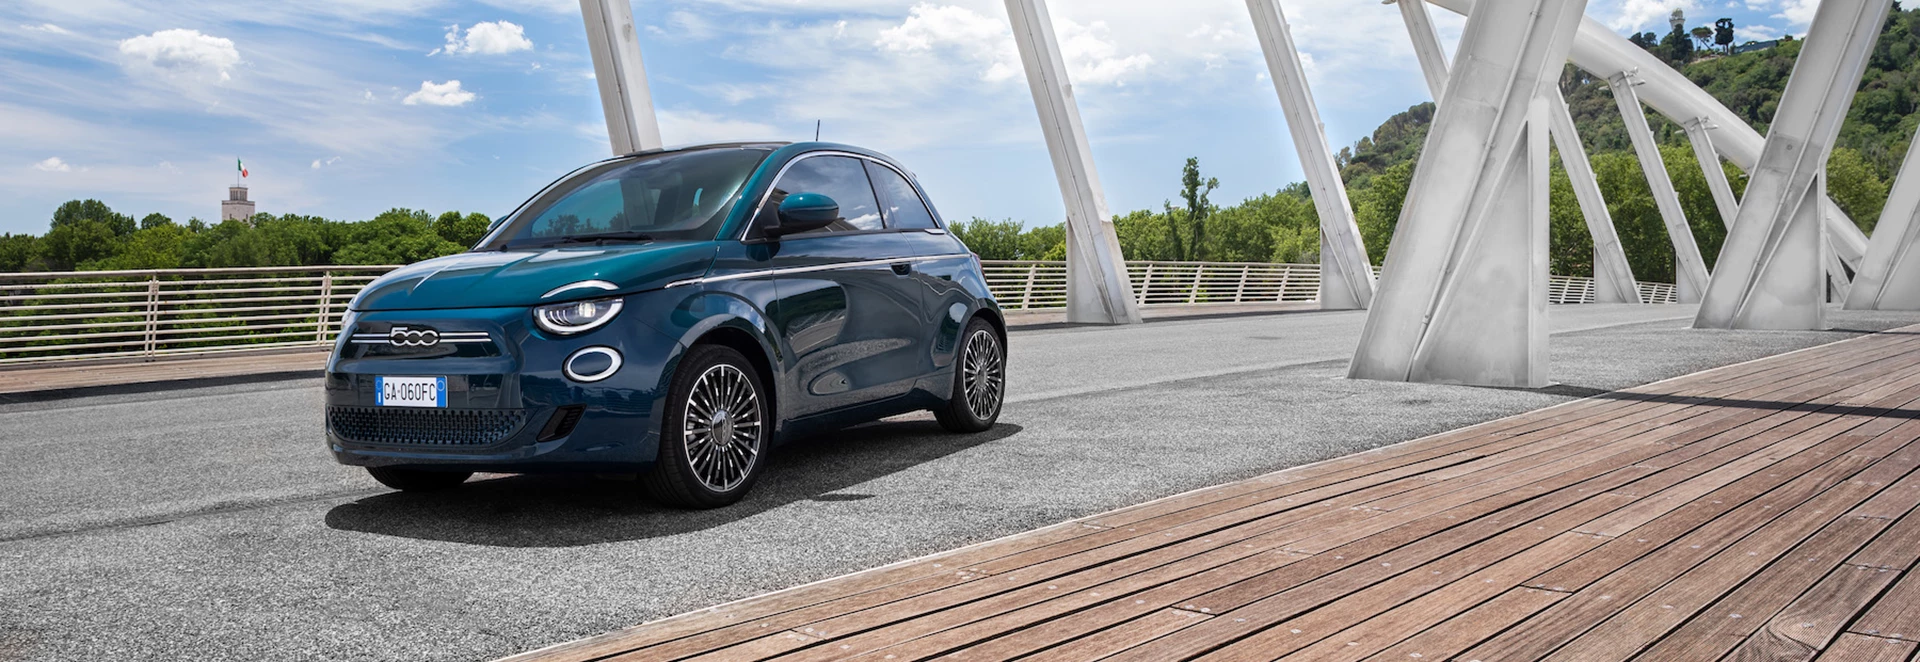 Reservations open for new electric Fiat 500 